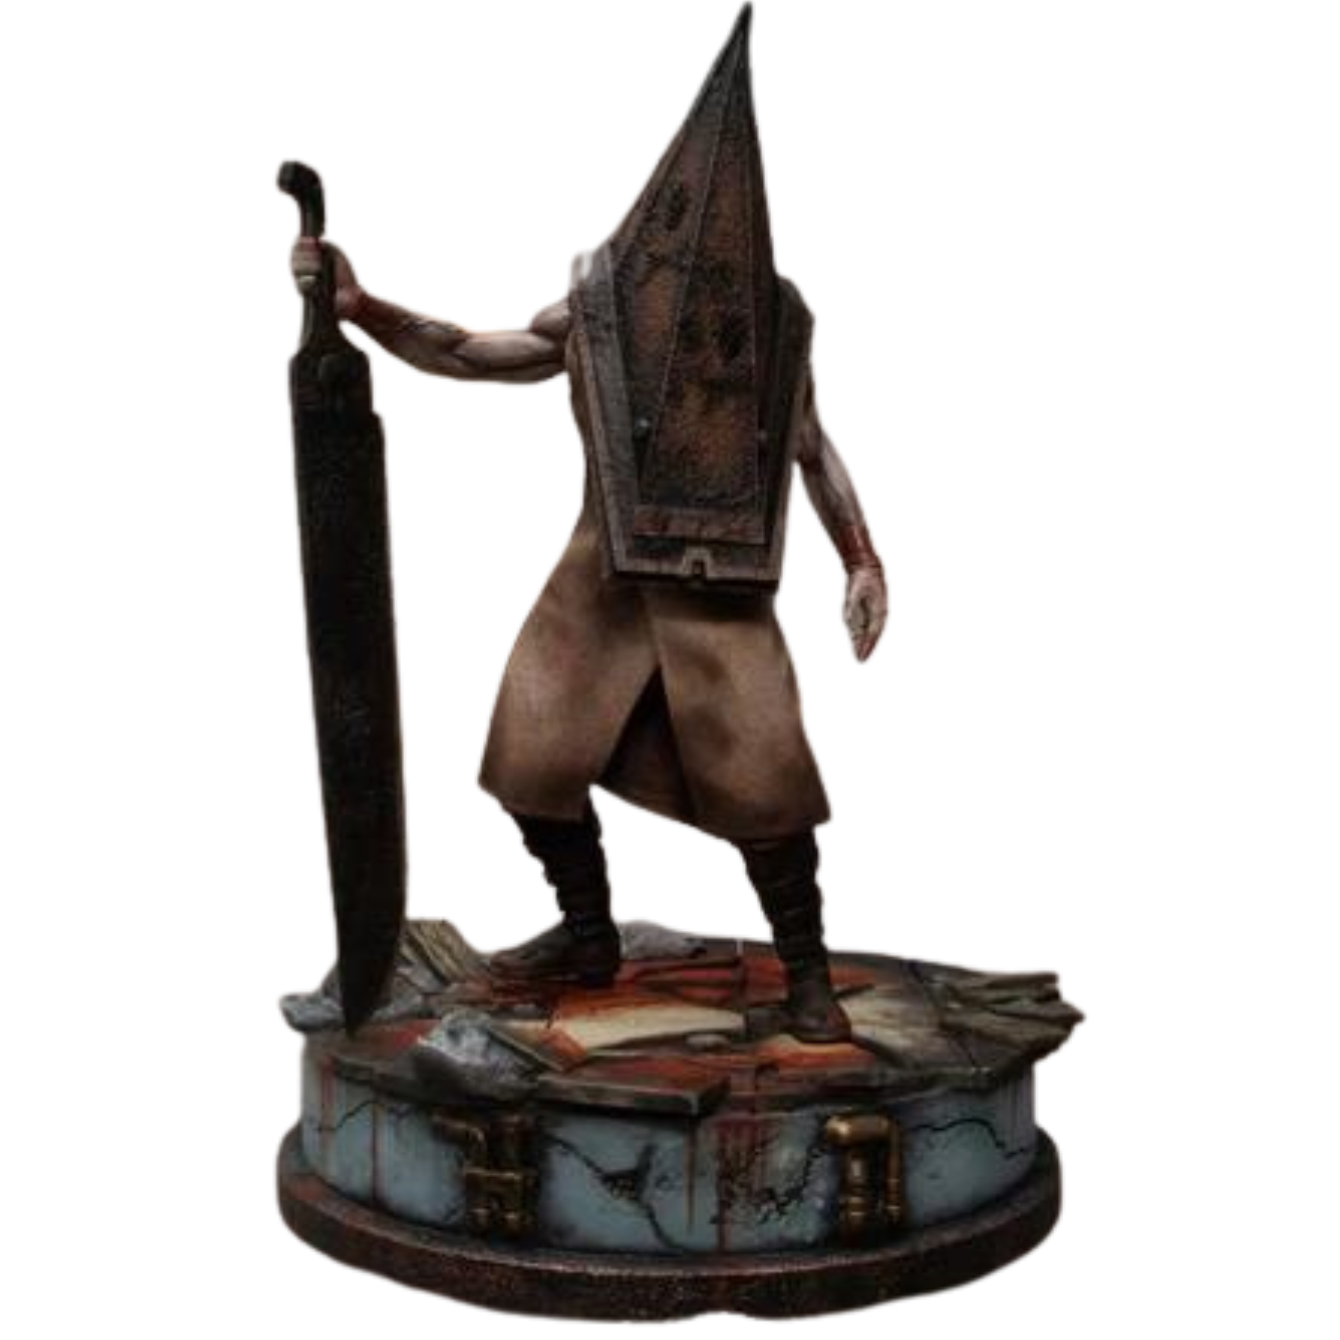 Silent Hill 2: Red Pyramid Thing Statue